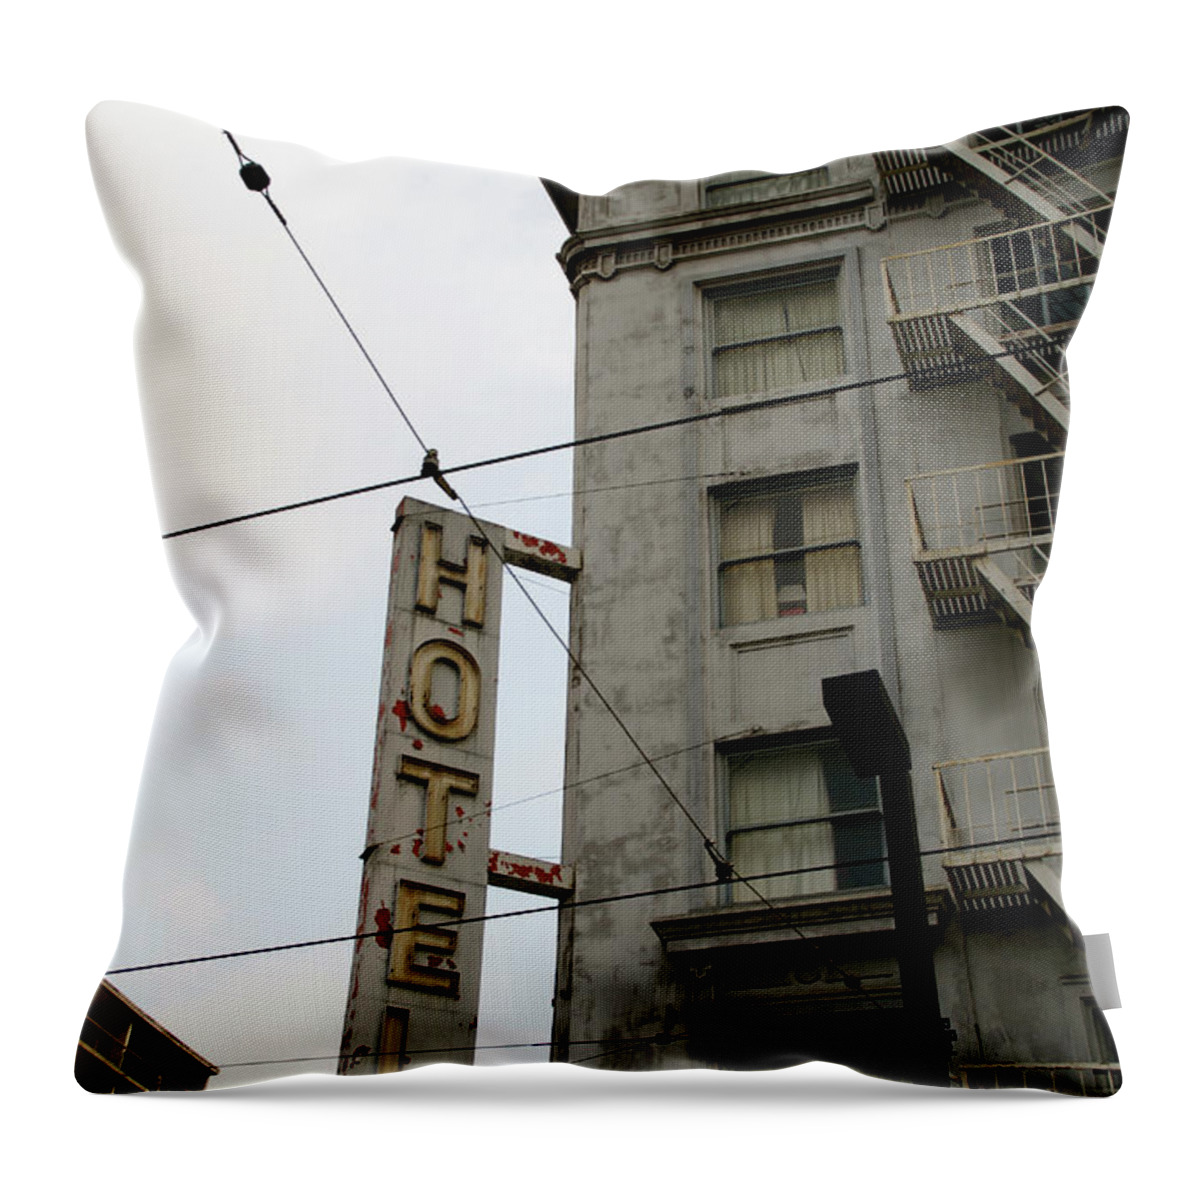 Building Throw Pillow featuring the photograph Hotel by Linda Shafer